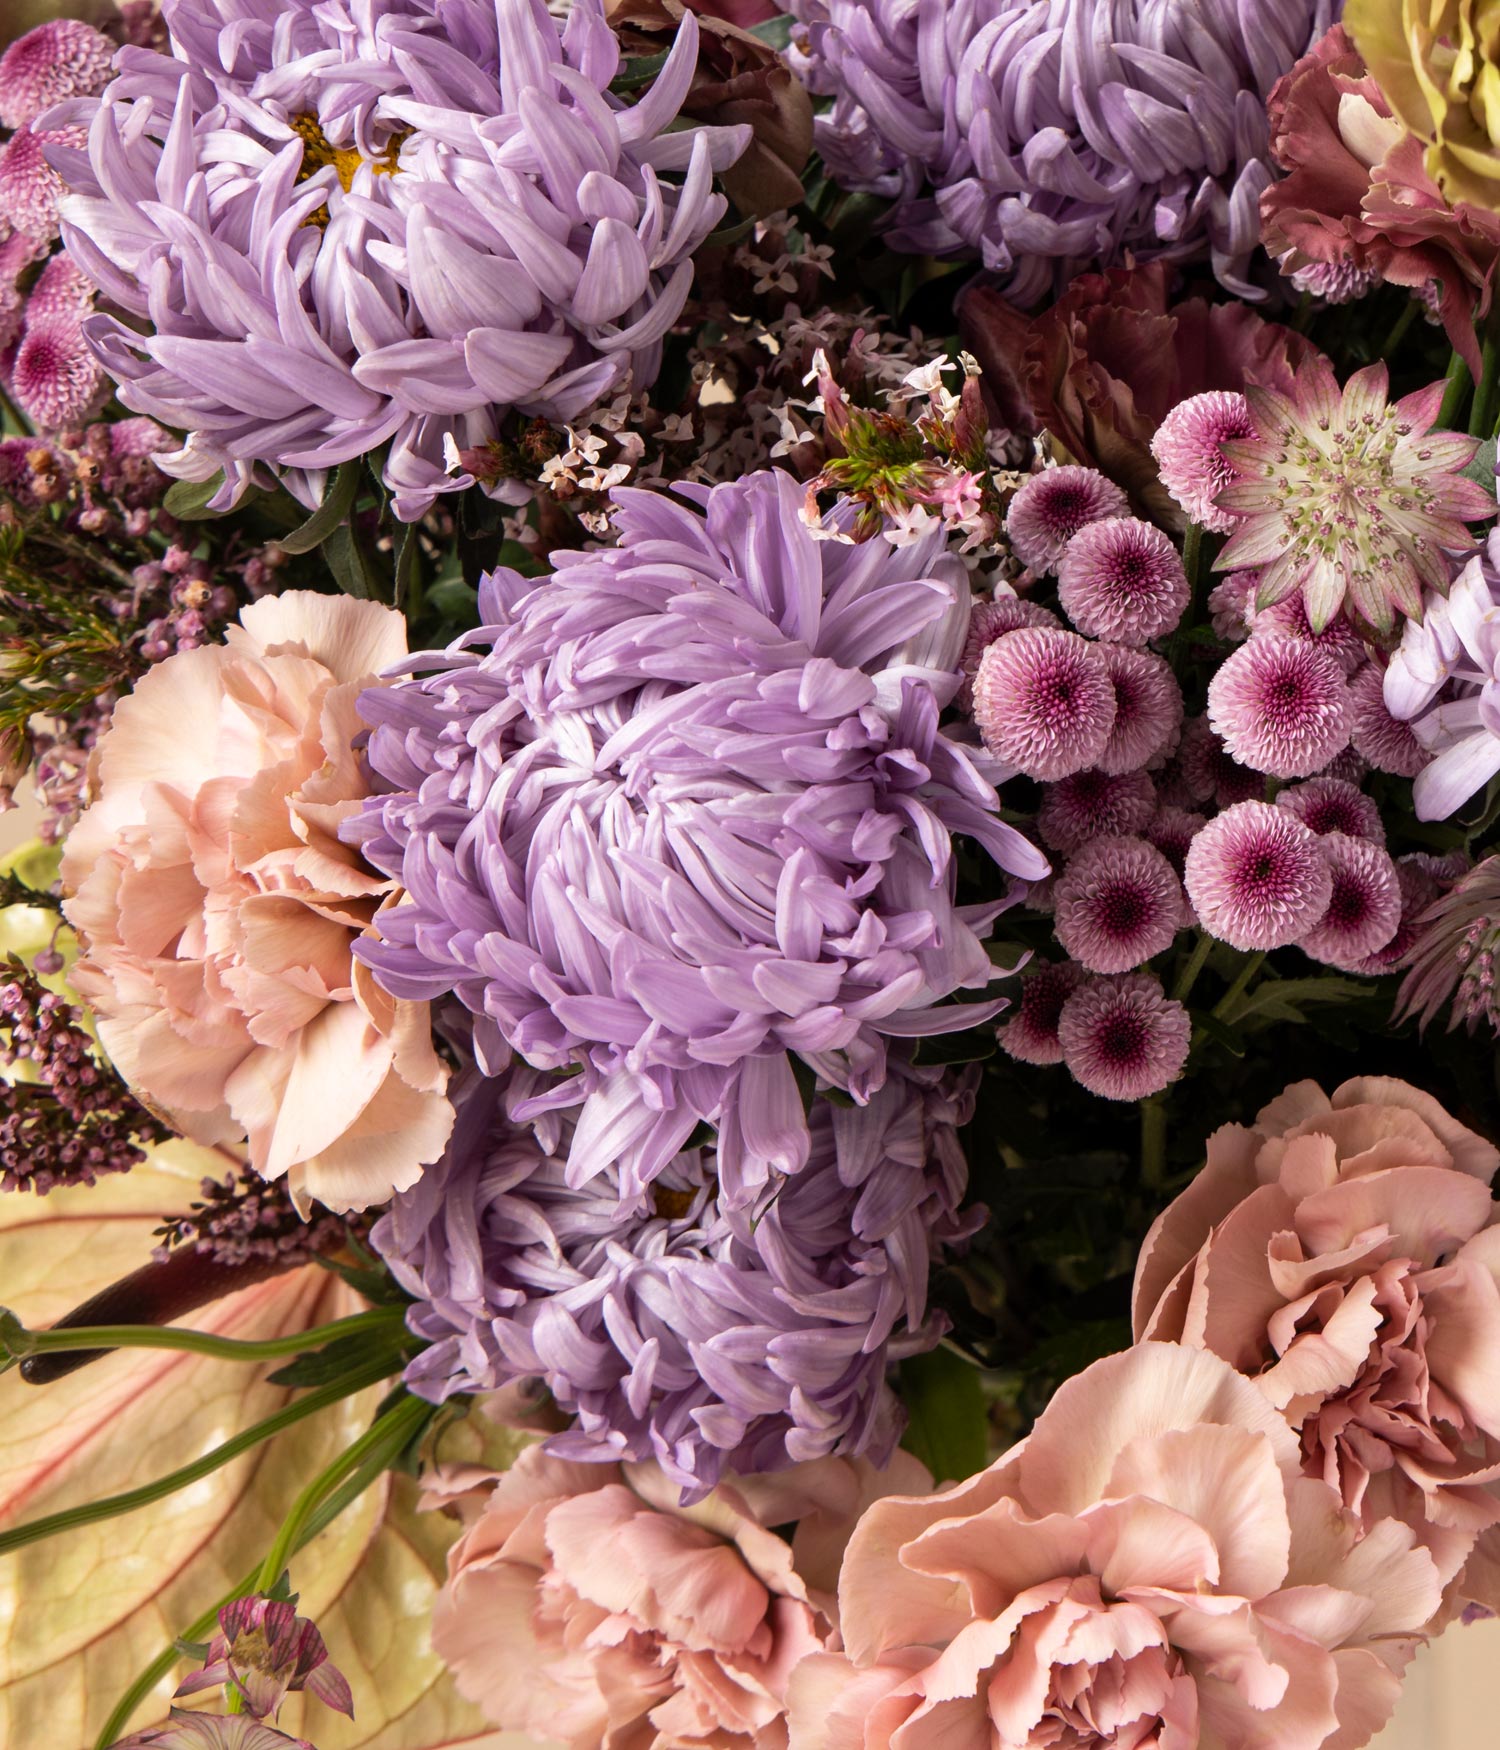 Detail of Luna aster and eustoma flower bouquet